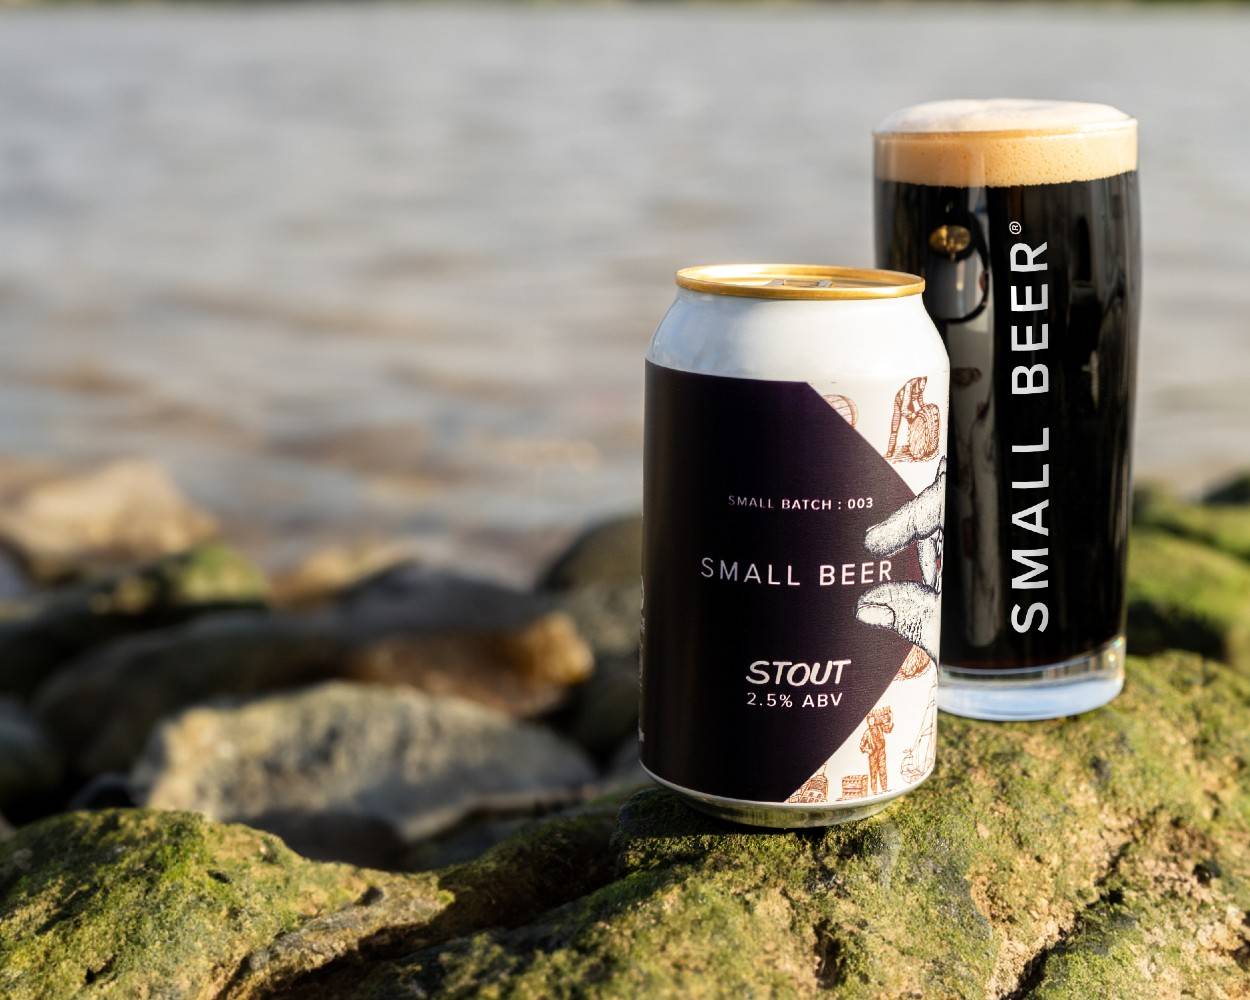 Stout is a historic dark beer that is similar to porter